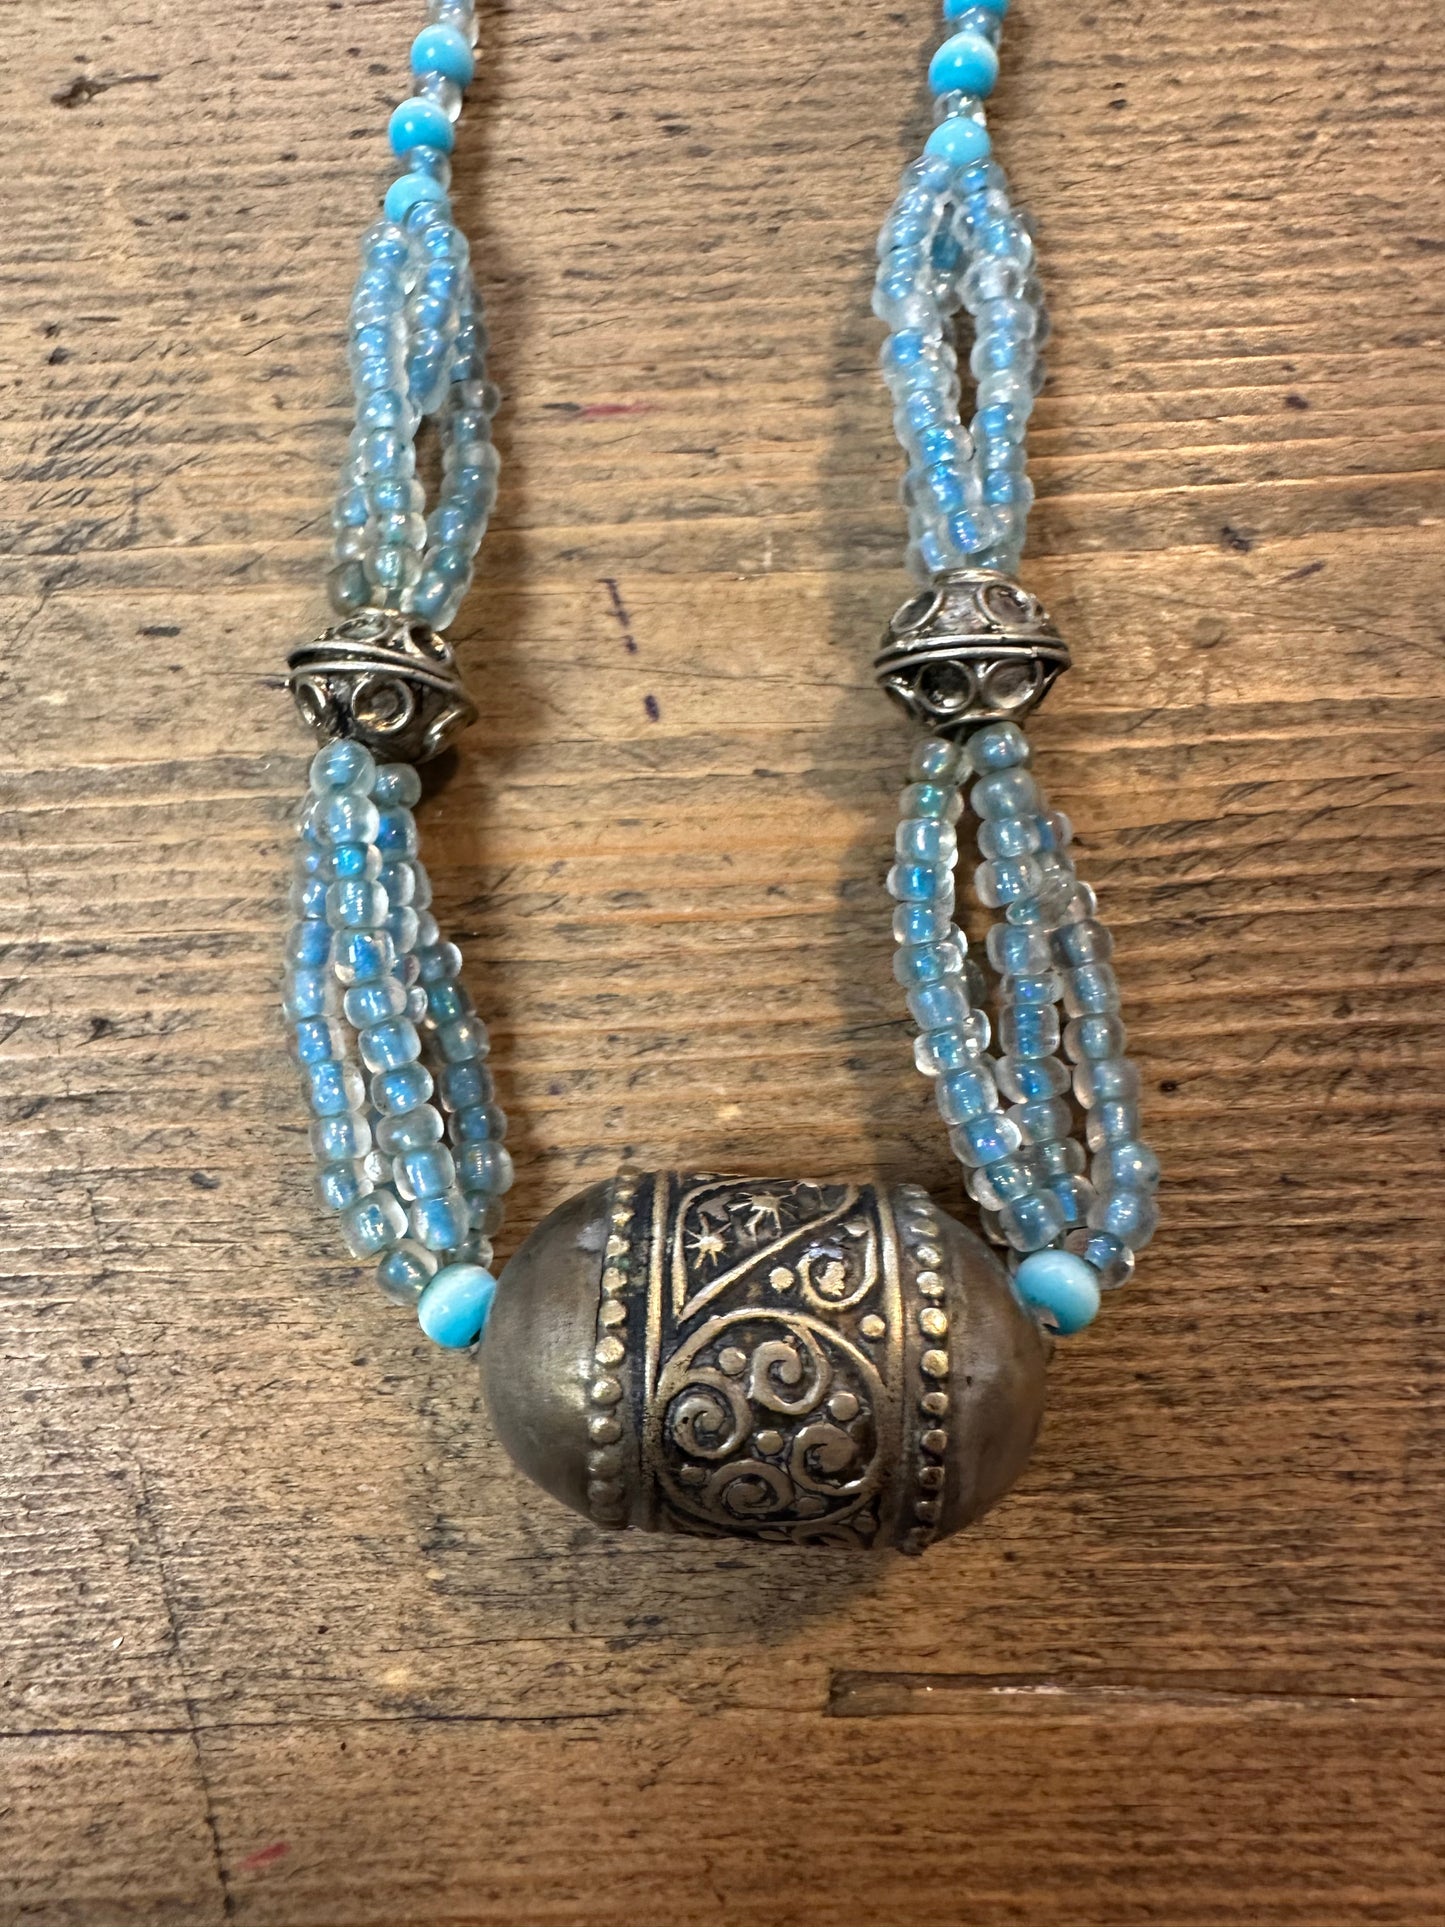 Vintage Boho Indian Blue Beads and Metal Costume Necklace